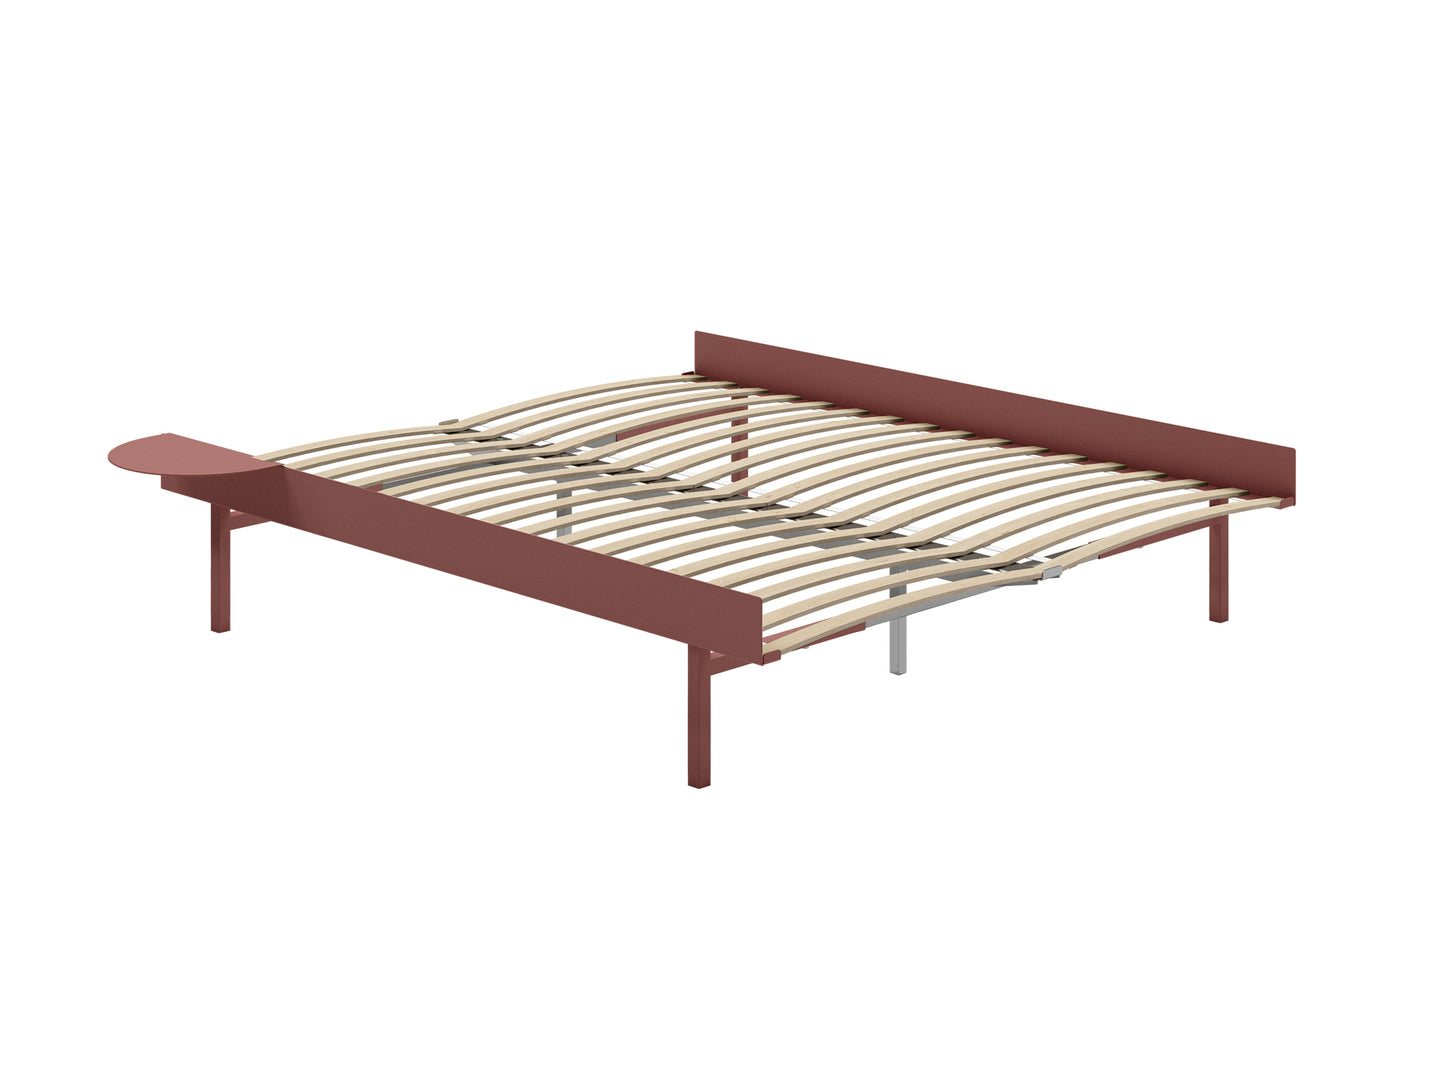 Bed 90 - 180 cm (High) by Moebe- Bed Frame / with 160cm wide Slats / 1 Side Table / Dusty Rose